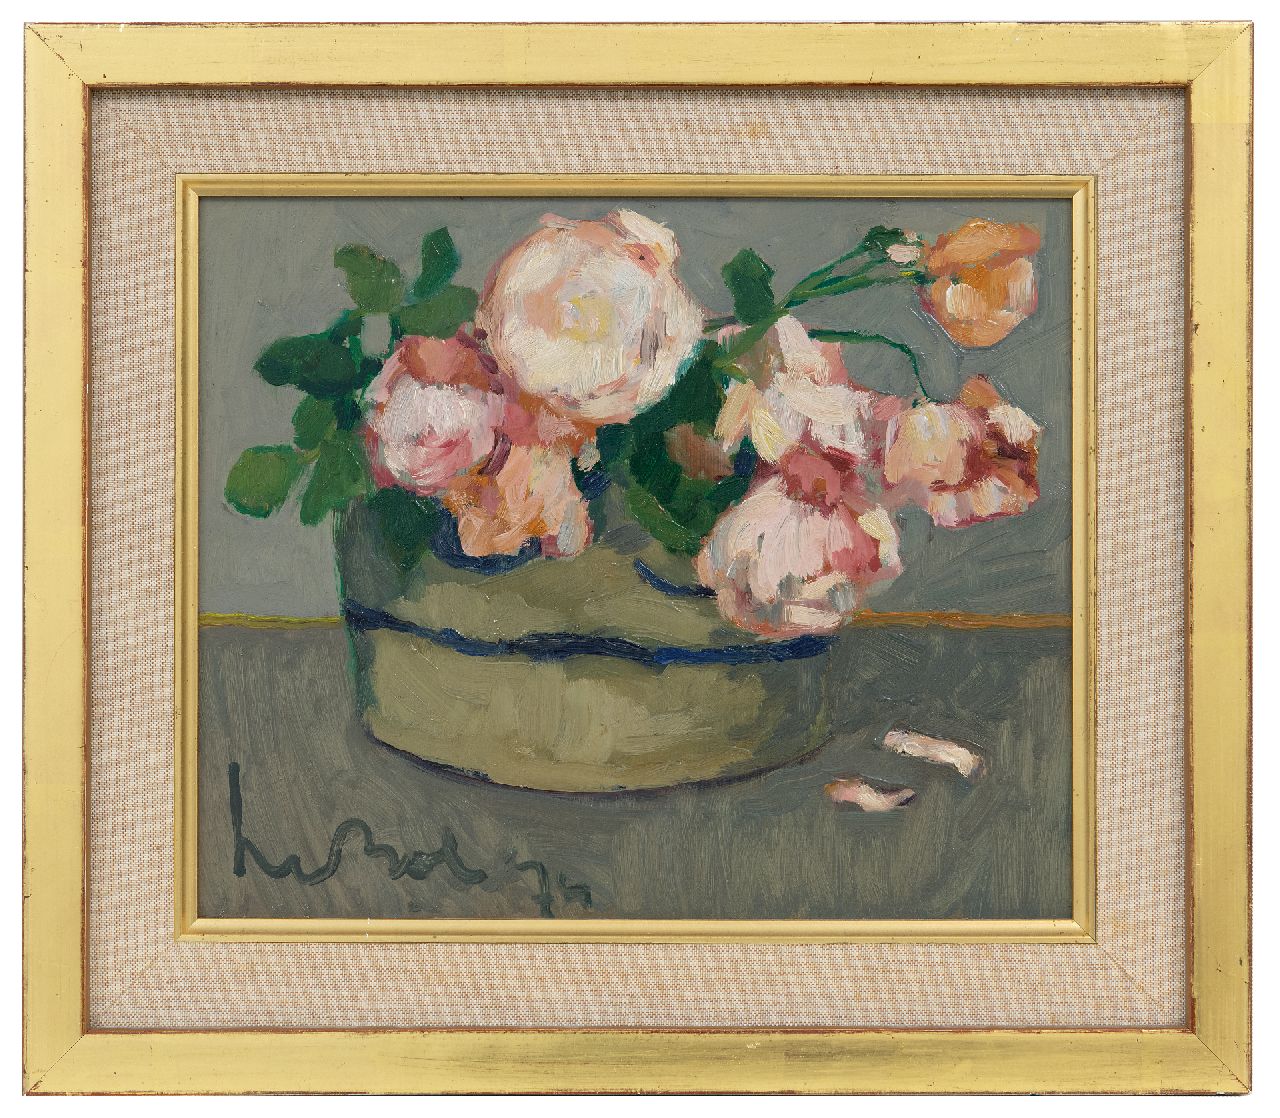 Bol K.  | Cornelis 'Kees' Bol, Roses, oil on board 23.3 x 28.1 cm, signed l.l. and dated on the reverse 1974